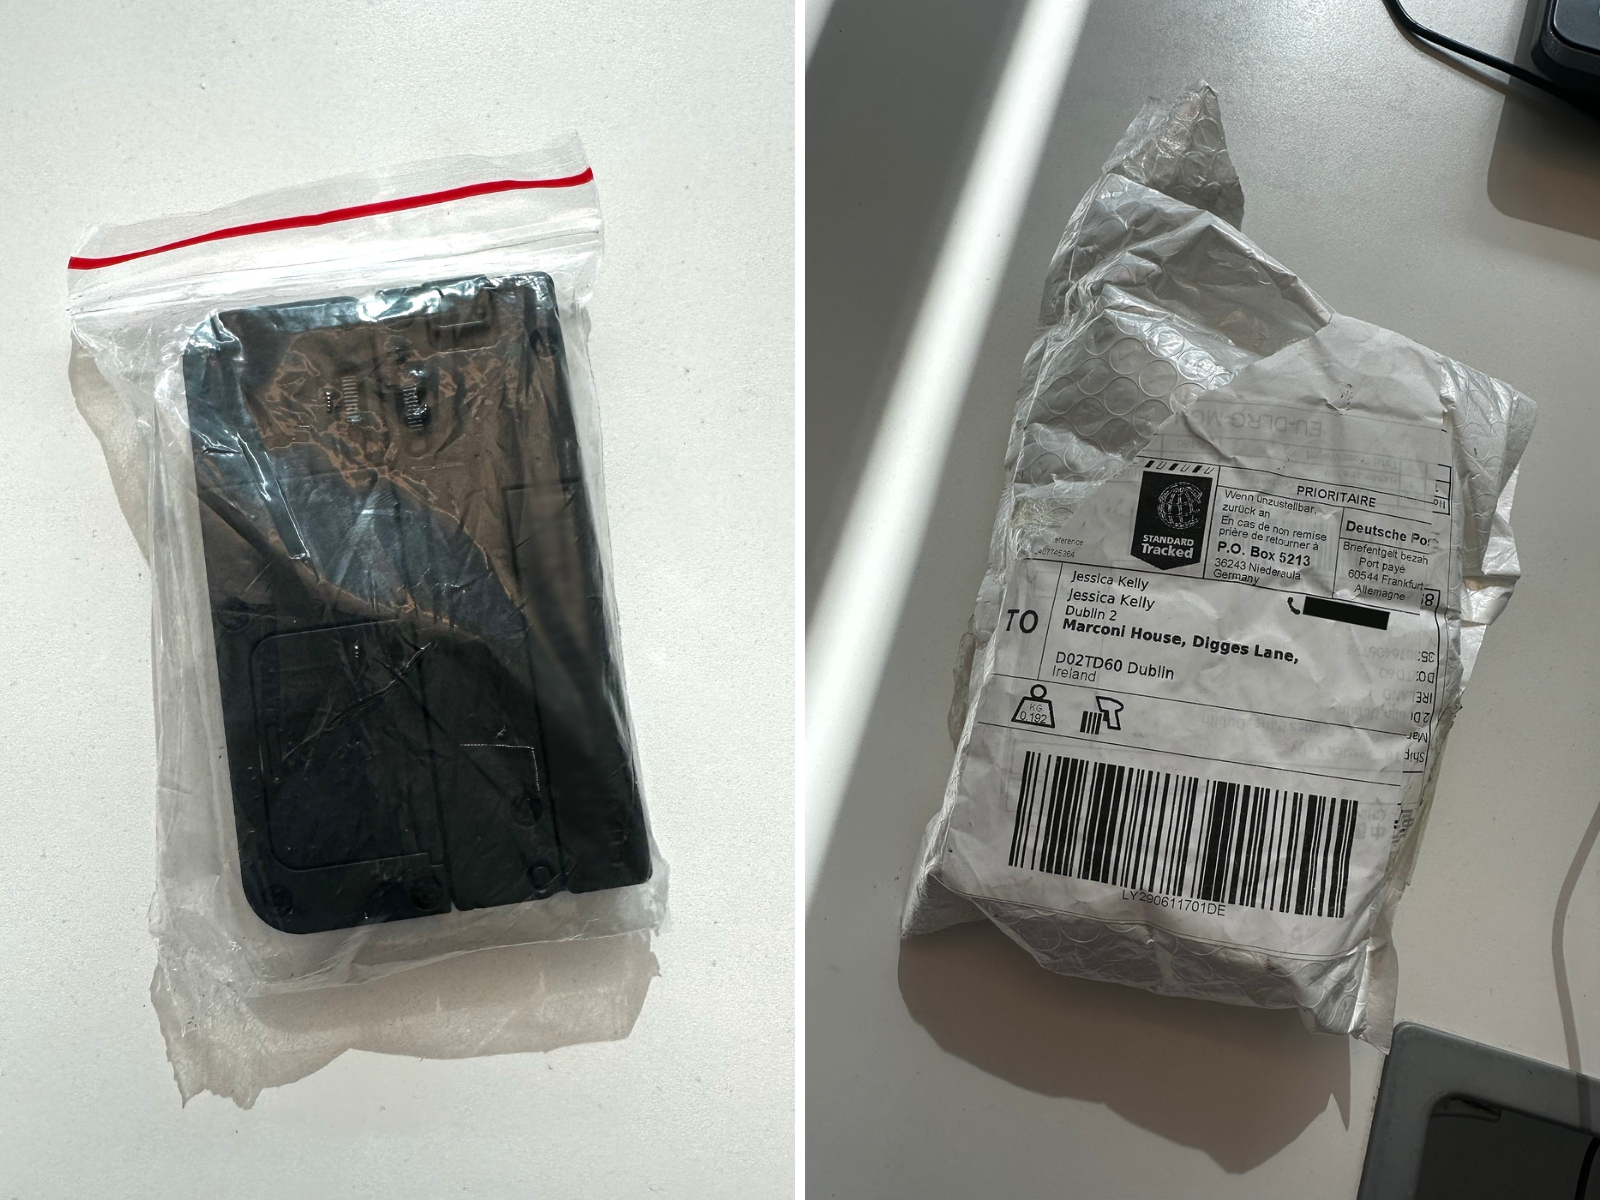 A package containing a sophisticated imitation firearm that arrived at the Newstalk studios. Image: Newstalk